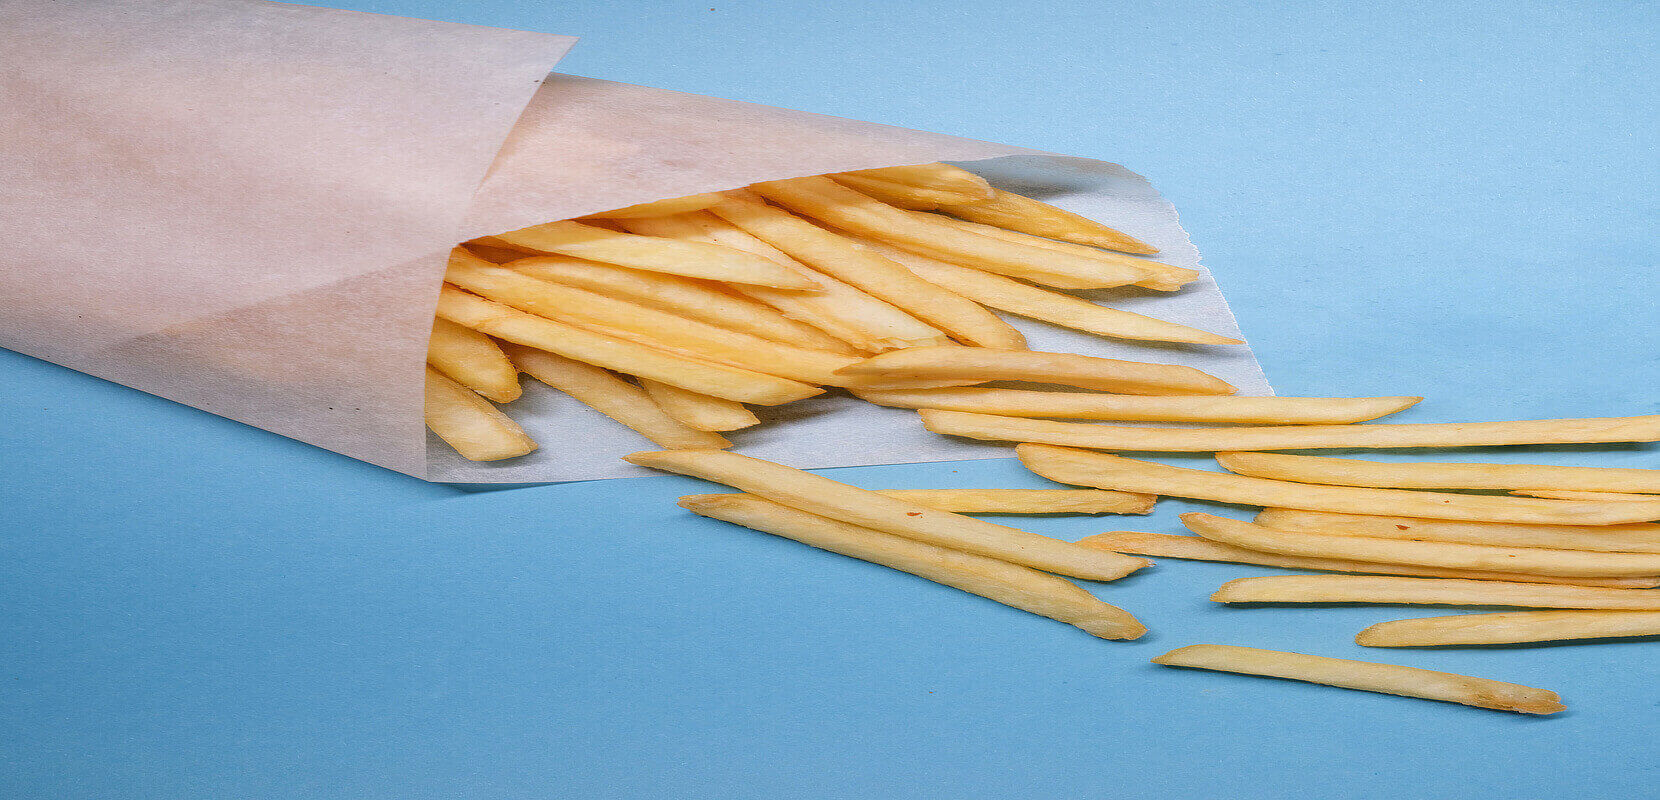 a bag of french fries